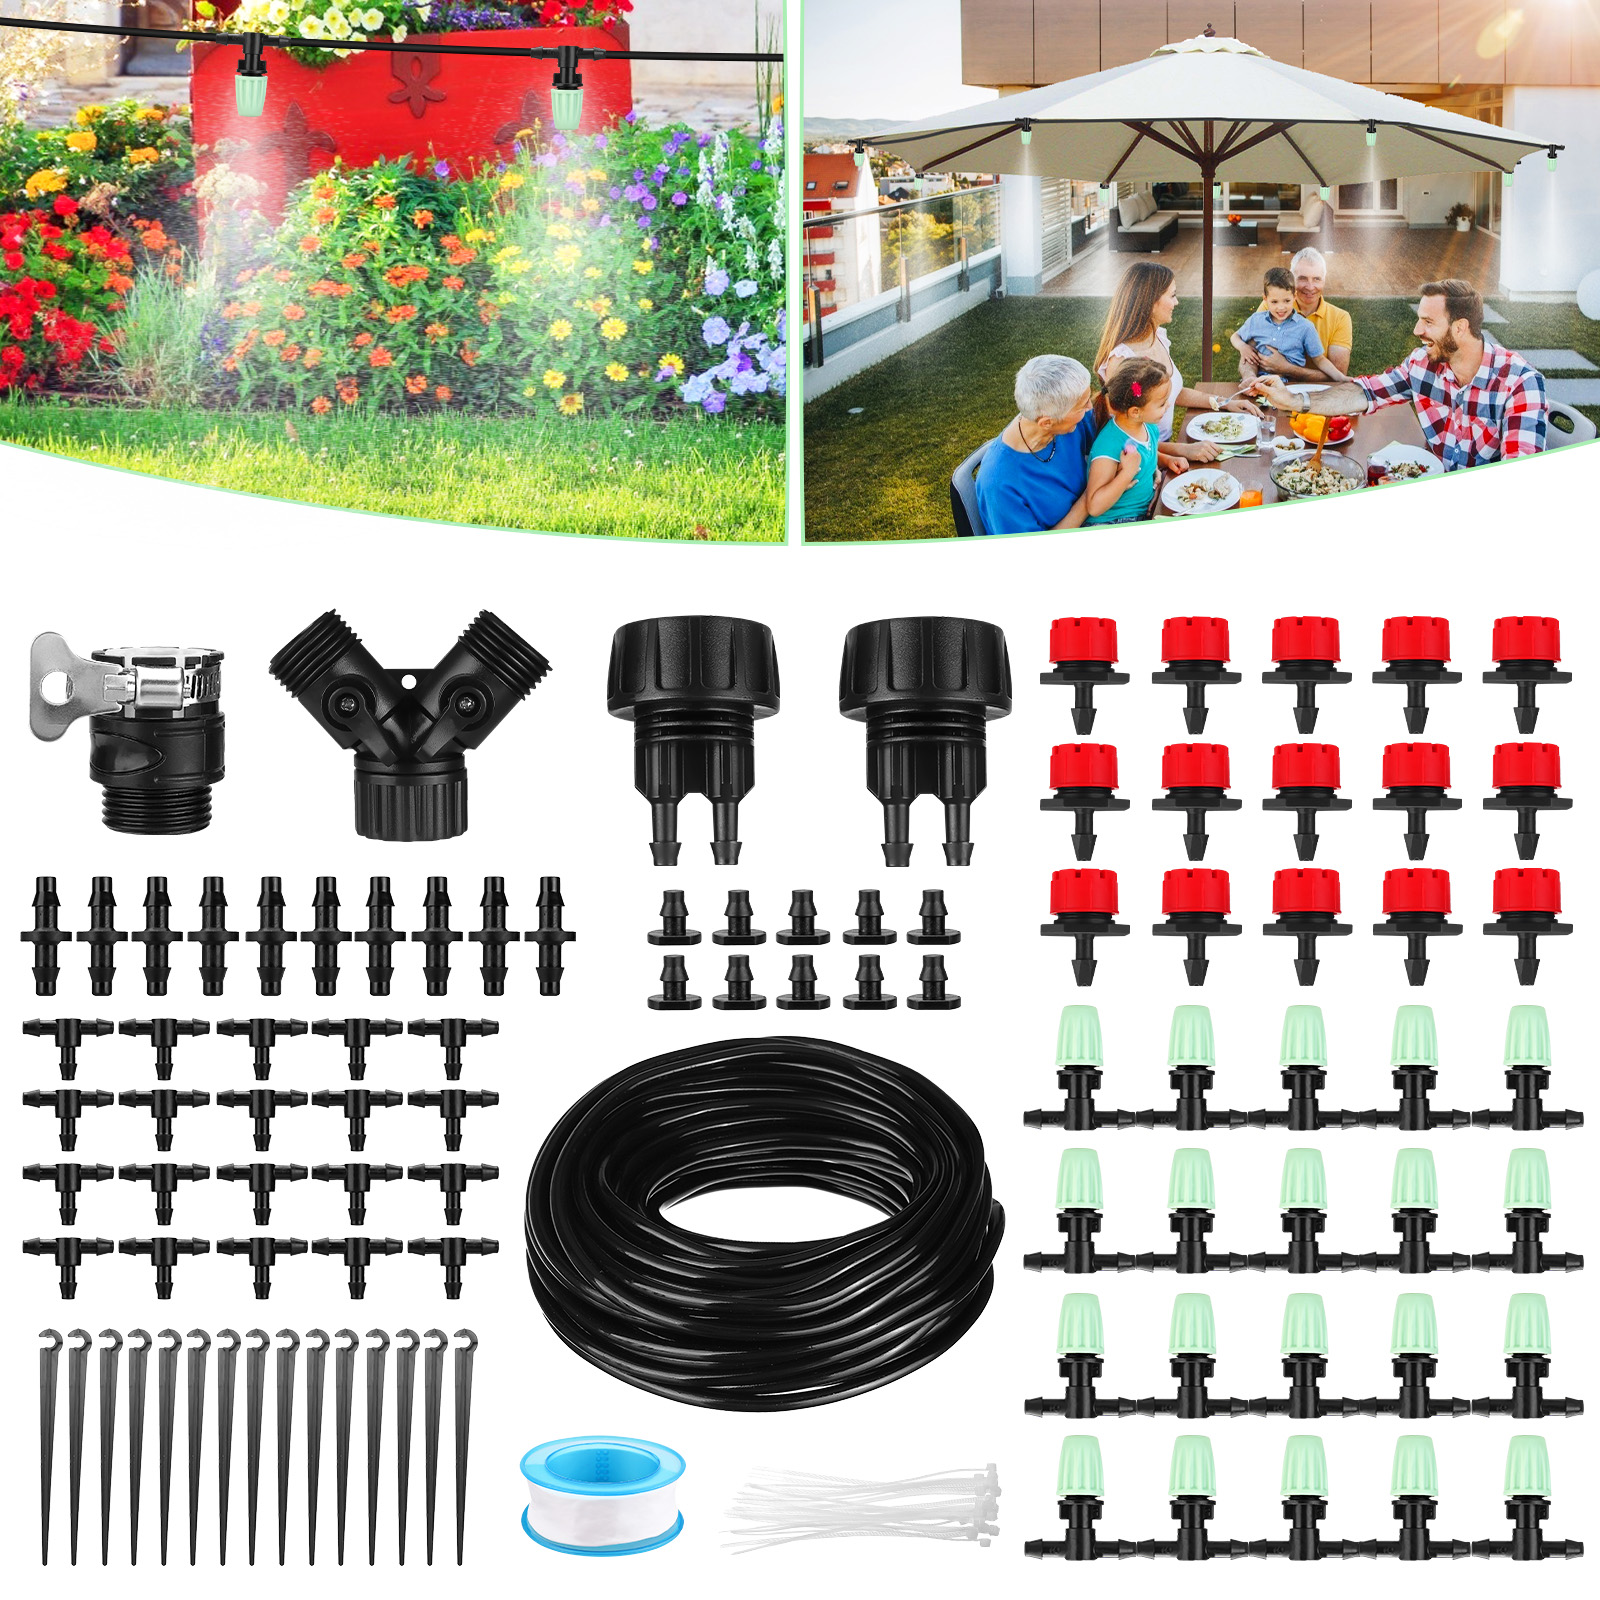 25M-Micro-Drip-Irrigation-Kit-DIY-Automatic-Drip-Irrigation-System-for-Garden-Greenhouse-Patio-1889798-1